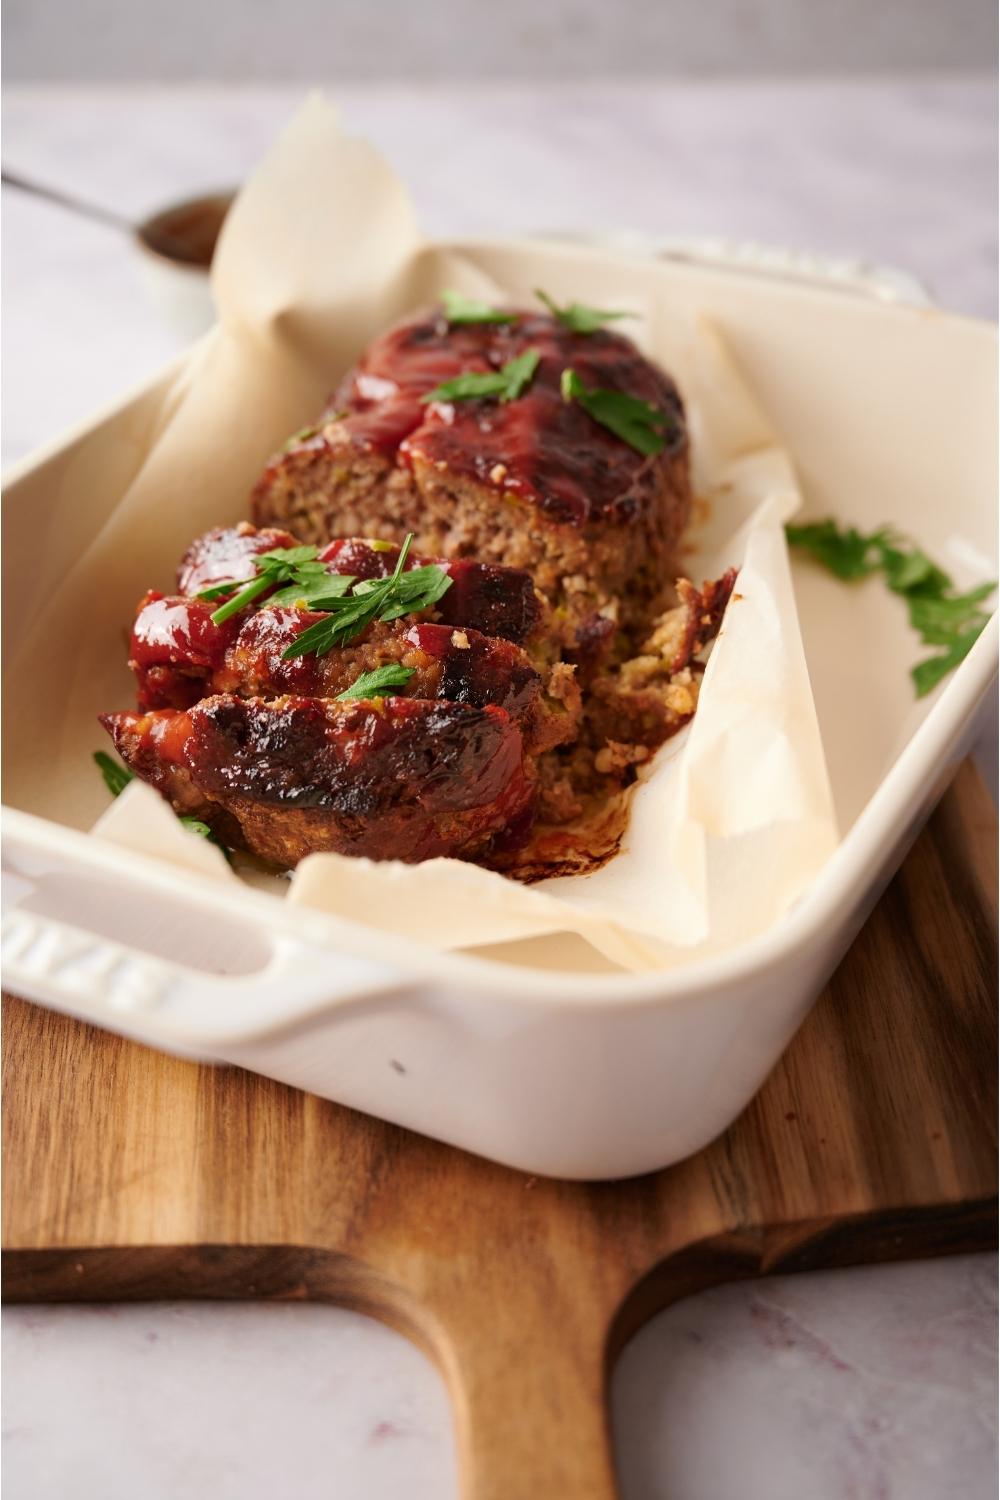 Southern meatloaf on parchment paper in a white baking dish. The dish is resting on a wood cutting board. Half of the meatloaf has been sliced to serve and the meatloaf is garnished with fresh parsley.